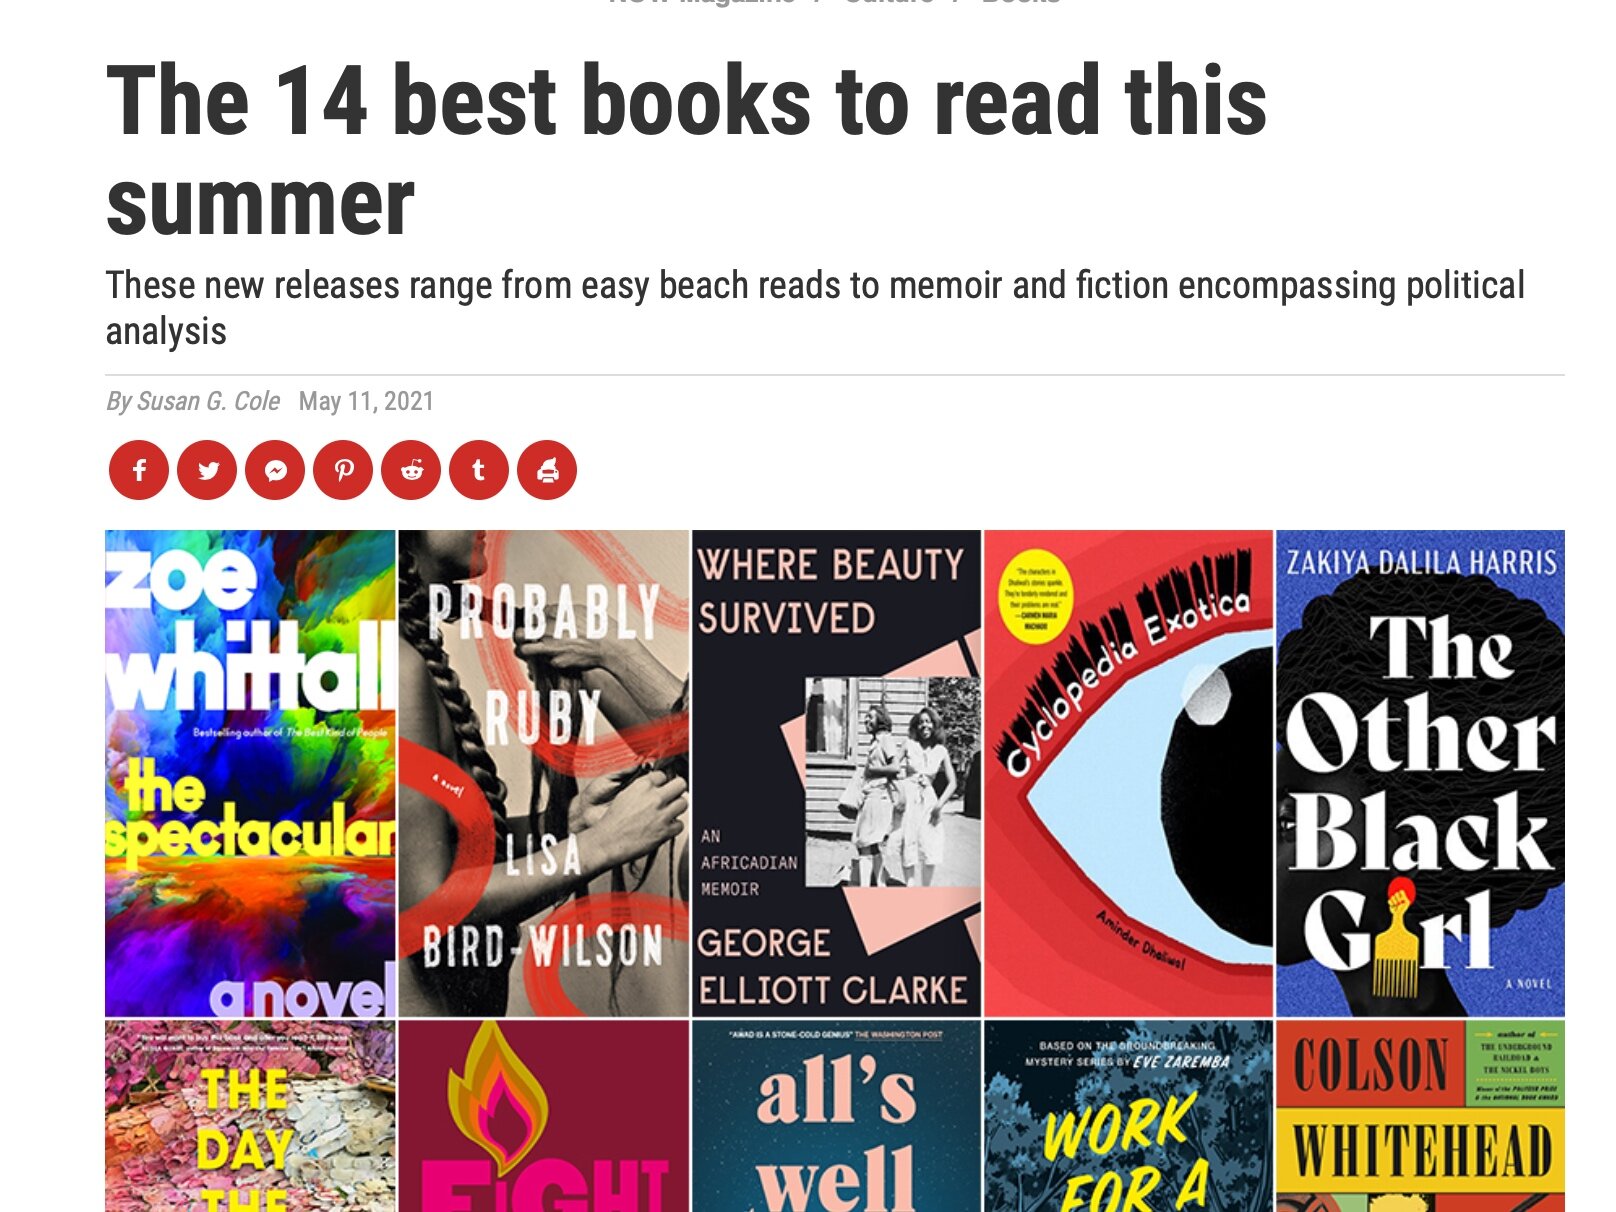 NOW TORONTO: 14 Best Books to Read This Summer